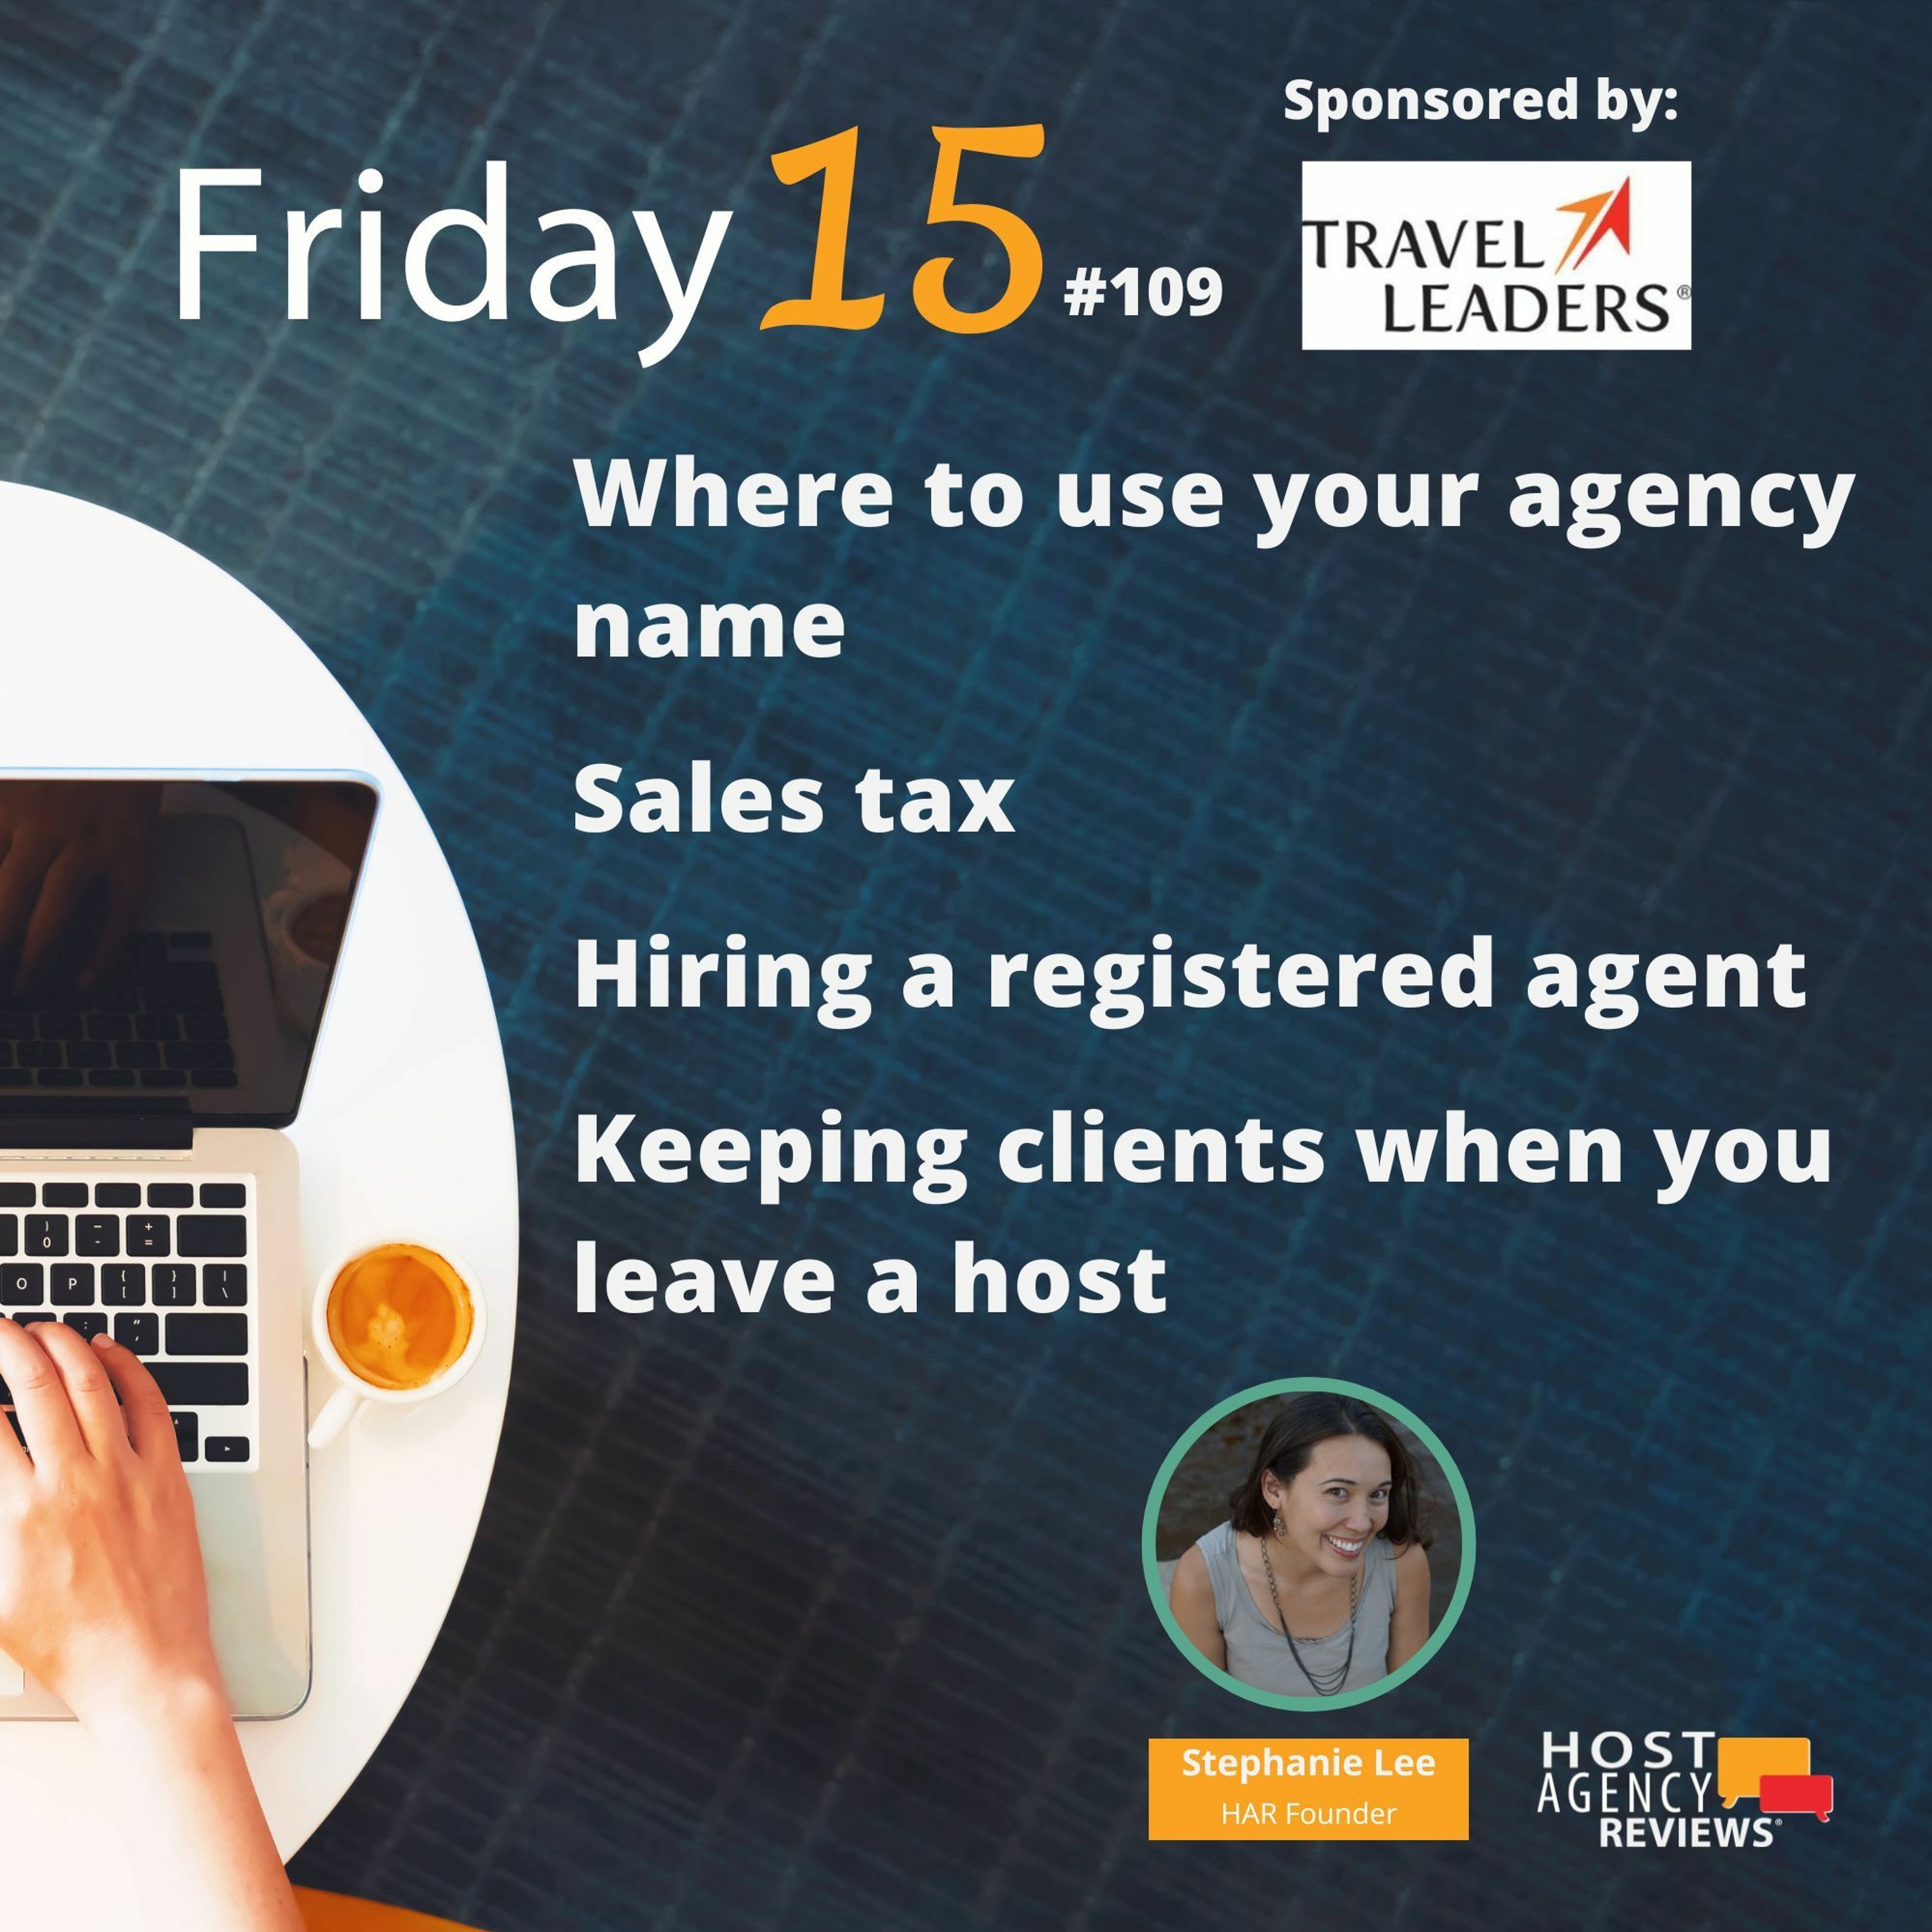 (109) Using your agency name, sales tax, hiring a registered agent, leaving host and keeping clients